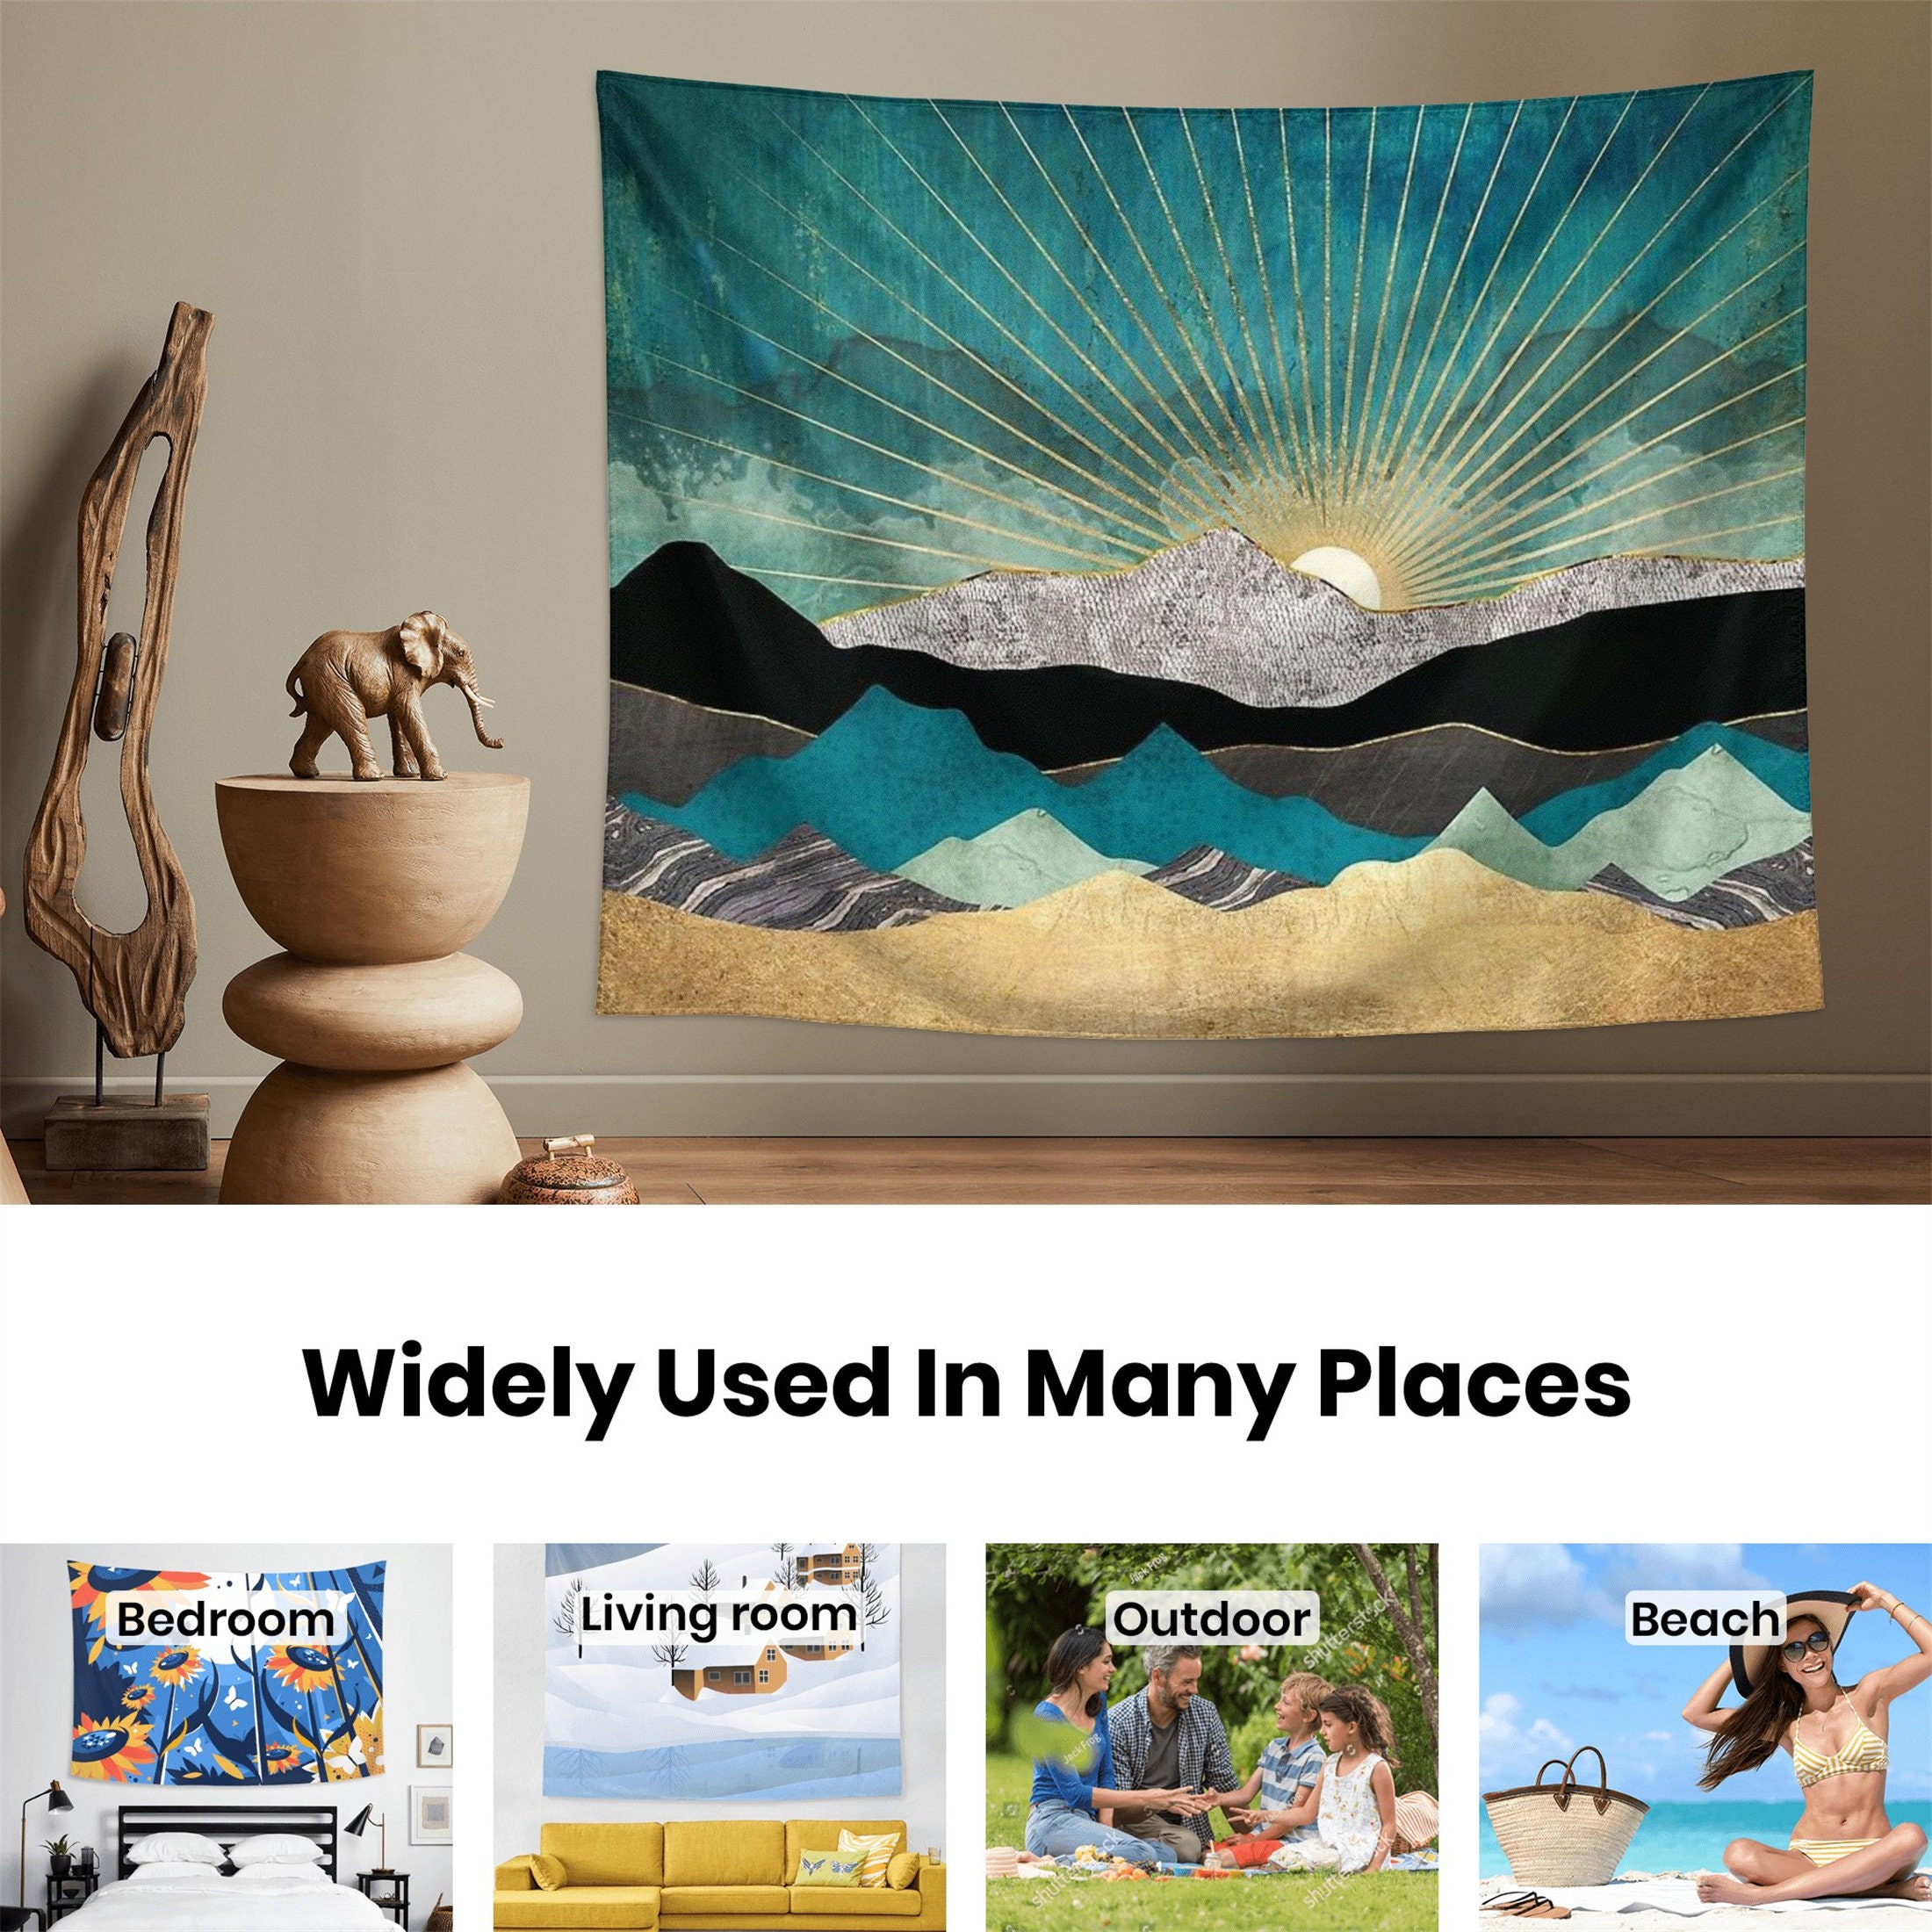 Sunrise and Mountain Tapestry Boho Tapestries Abstract Nature Landscape